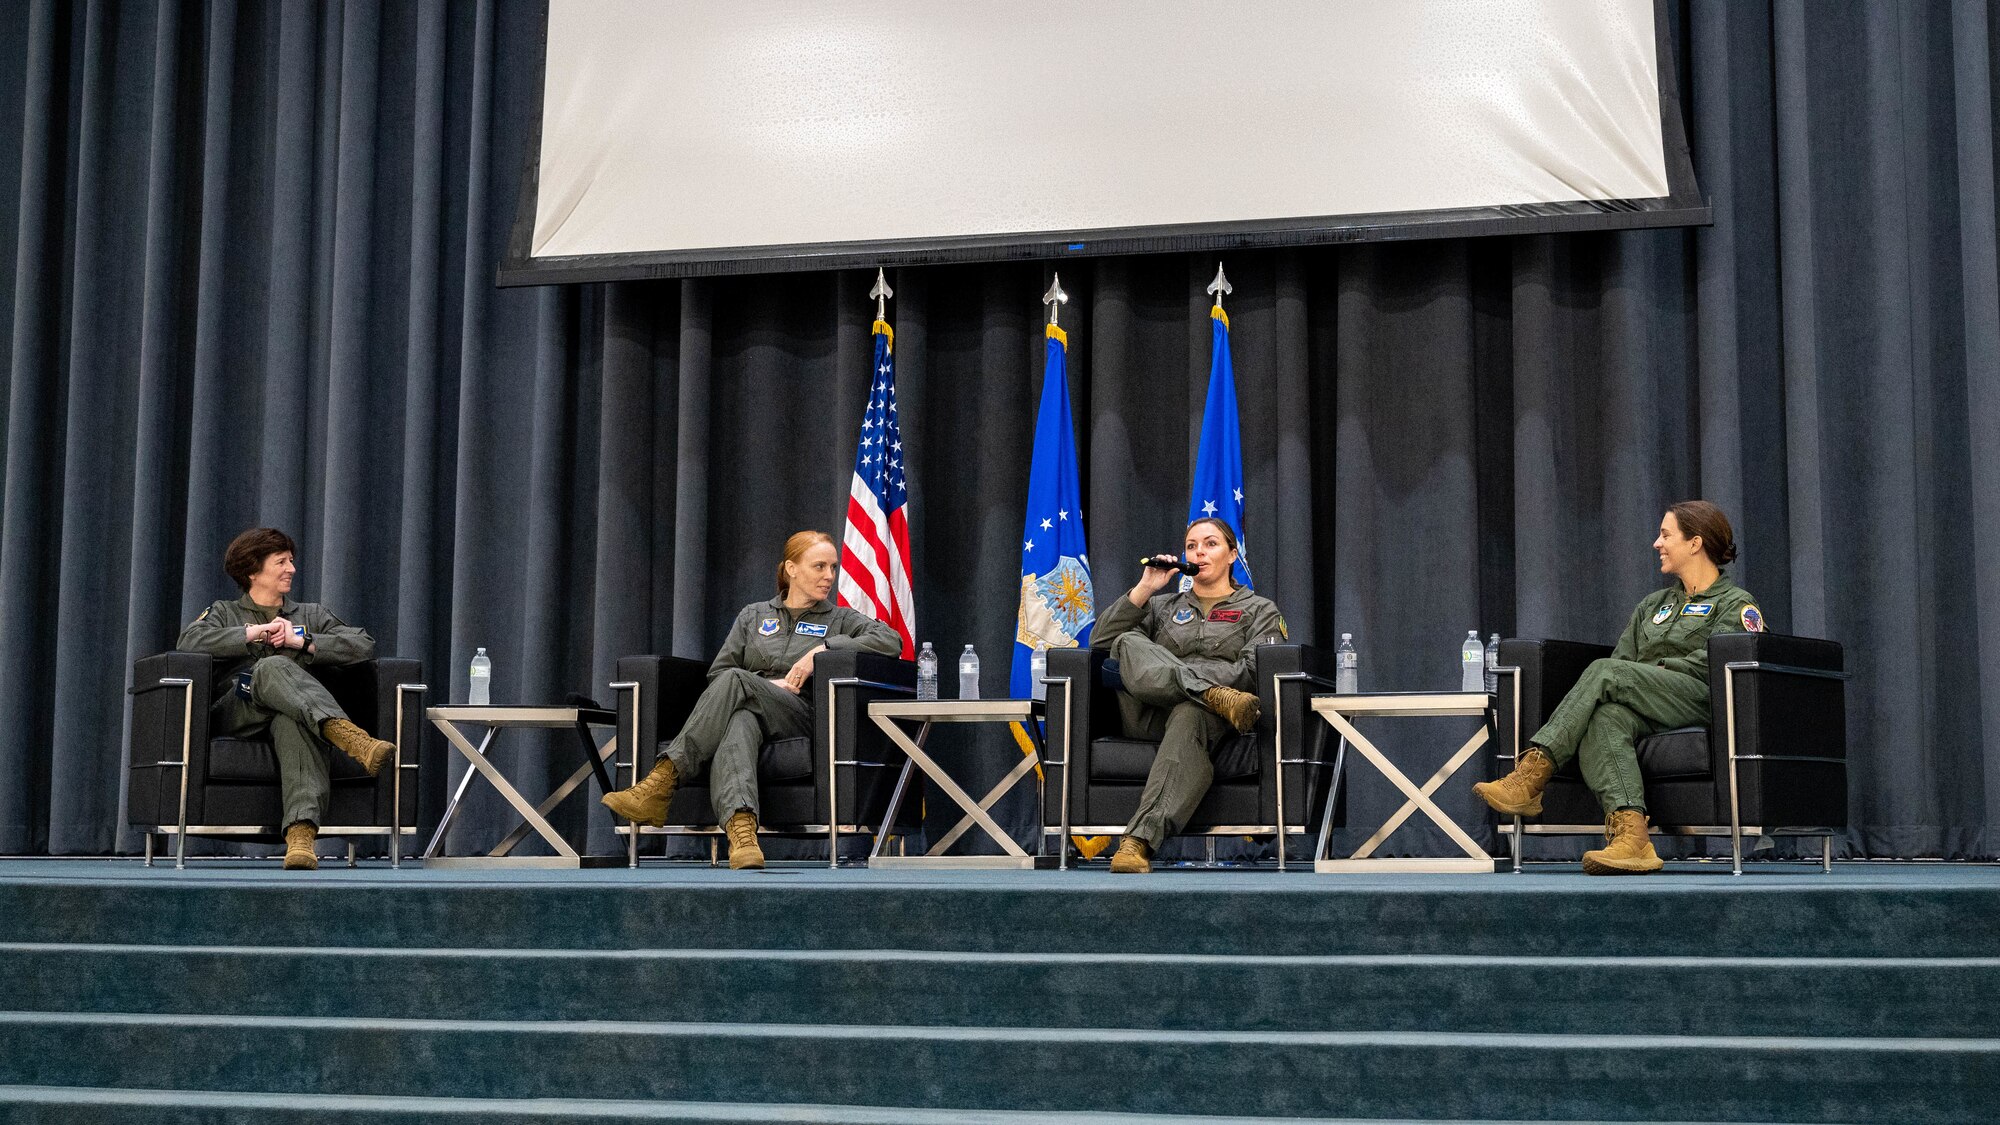 (Left to right) Col. Bridget McNamara, Eighth Air Force vice commander; Lt. Col. Kristen Jenkins, 28th Bomb Squadron commander; Lt. Col. Vanessa Wilcox, 96th Bomb Squadron commander; and Col. Beth Makros, chief learning officer for the commandant of cadets at the U.S. Air Force Academy, discuss their experiences as current or former commanders during the 2023 AFGSC Women's Leadership Symposium at Barksdale Air Force Base, La., July 27, 2023. Airmen and Guardians from AFGSC bases participated in the symposium virtually or in-person, discussing the importance of equity in leadership at all levels, and getting to hear from speakers and panels about the successes achieved and challenges experienced by women in the military. (Courtesy Photo)